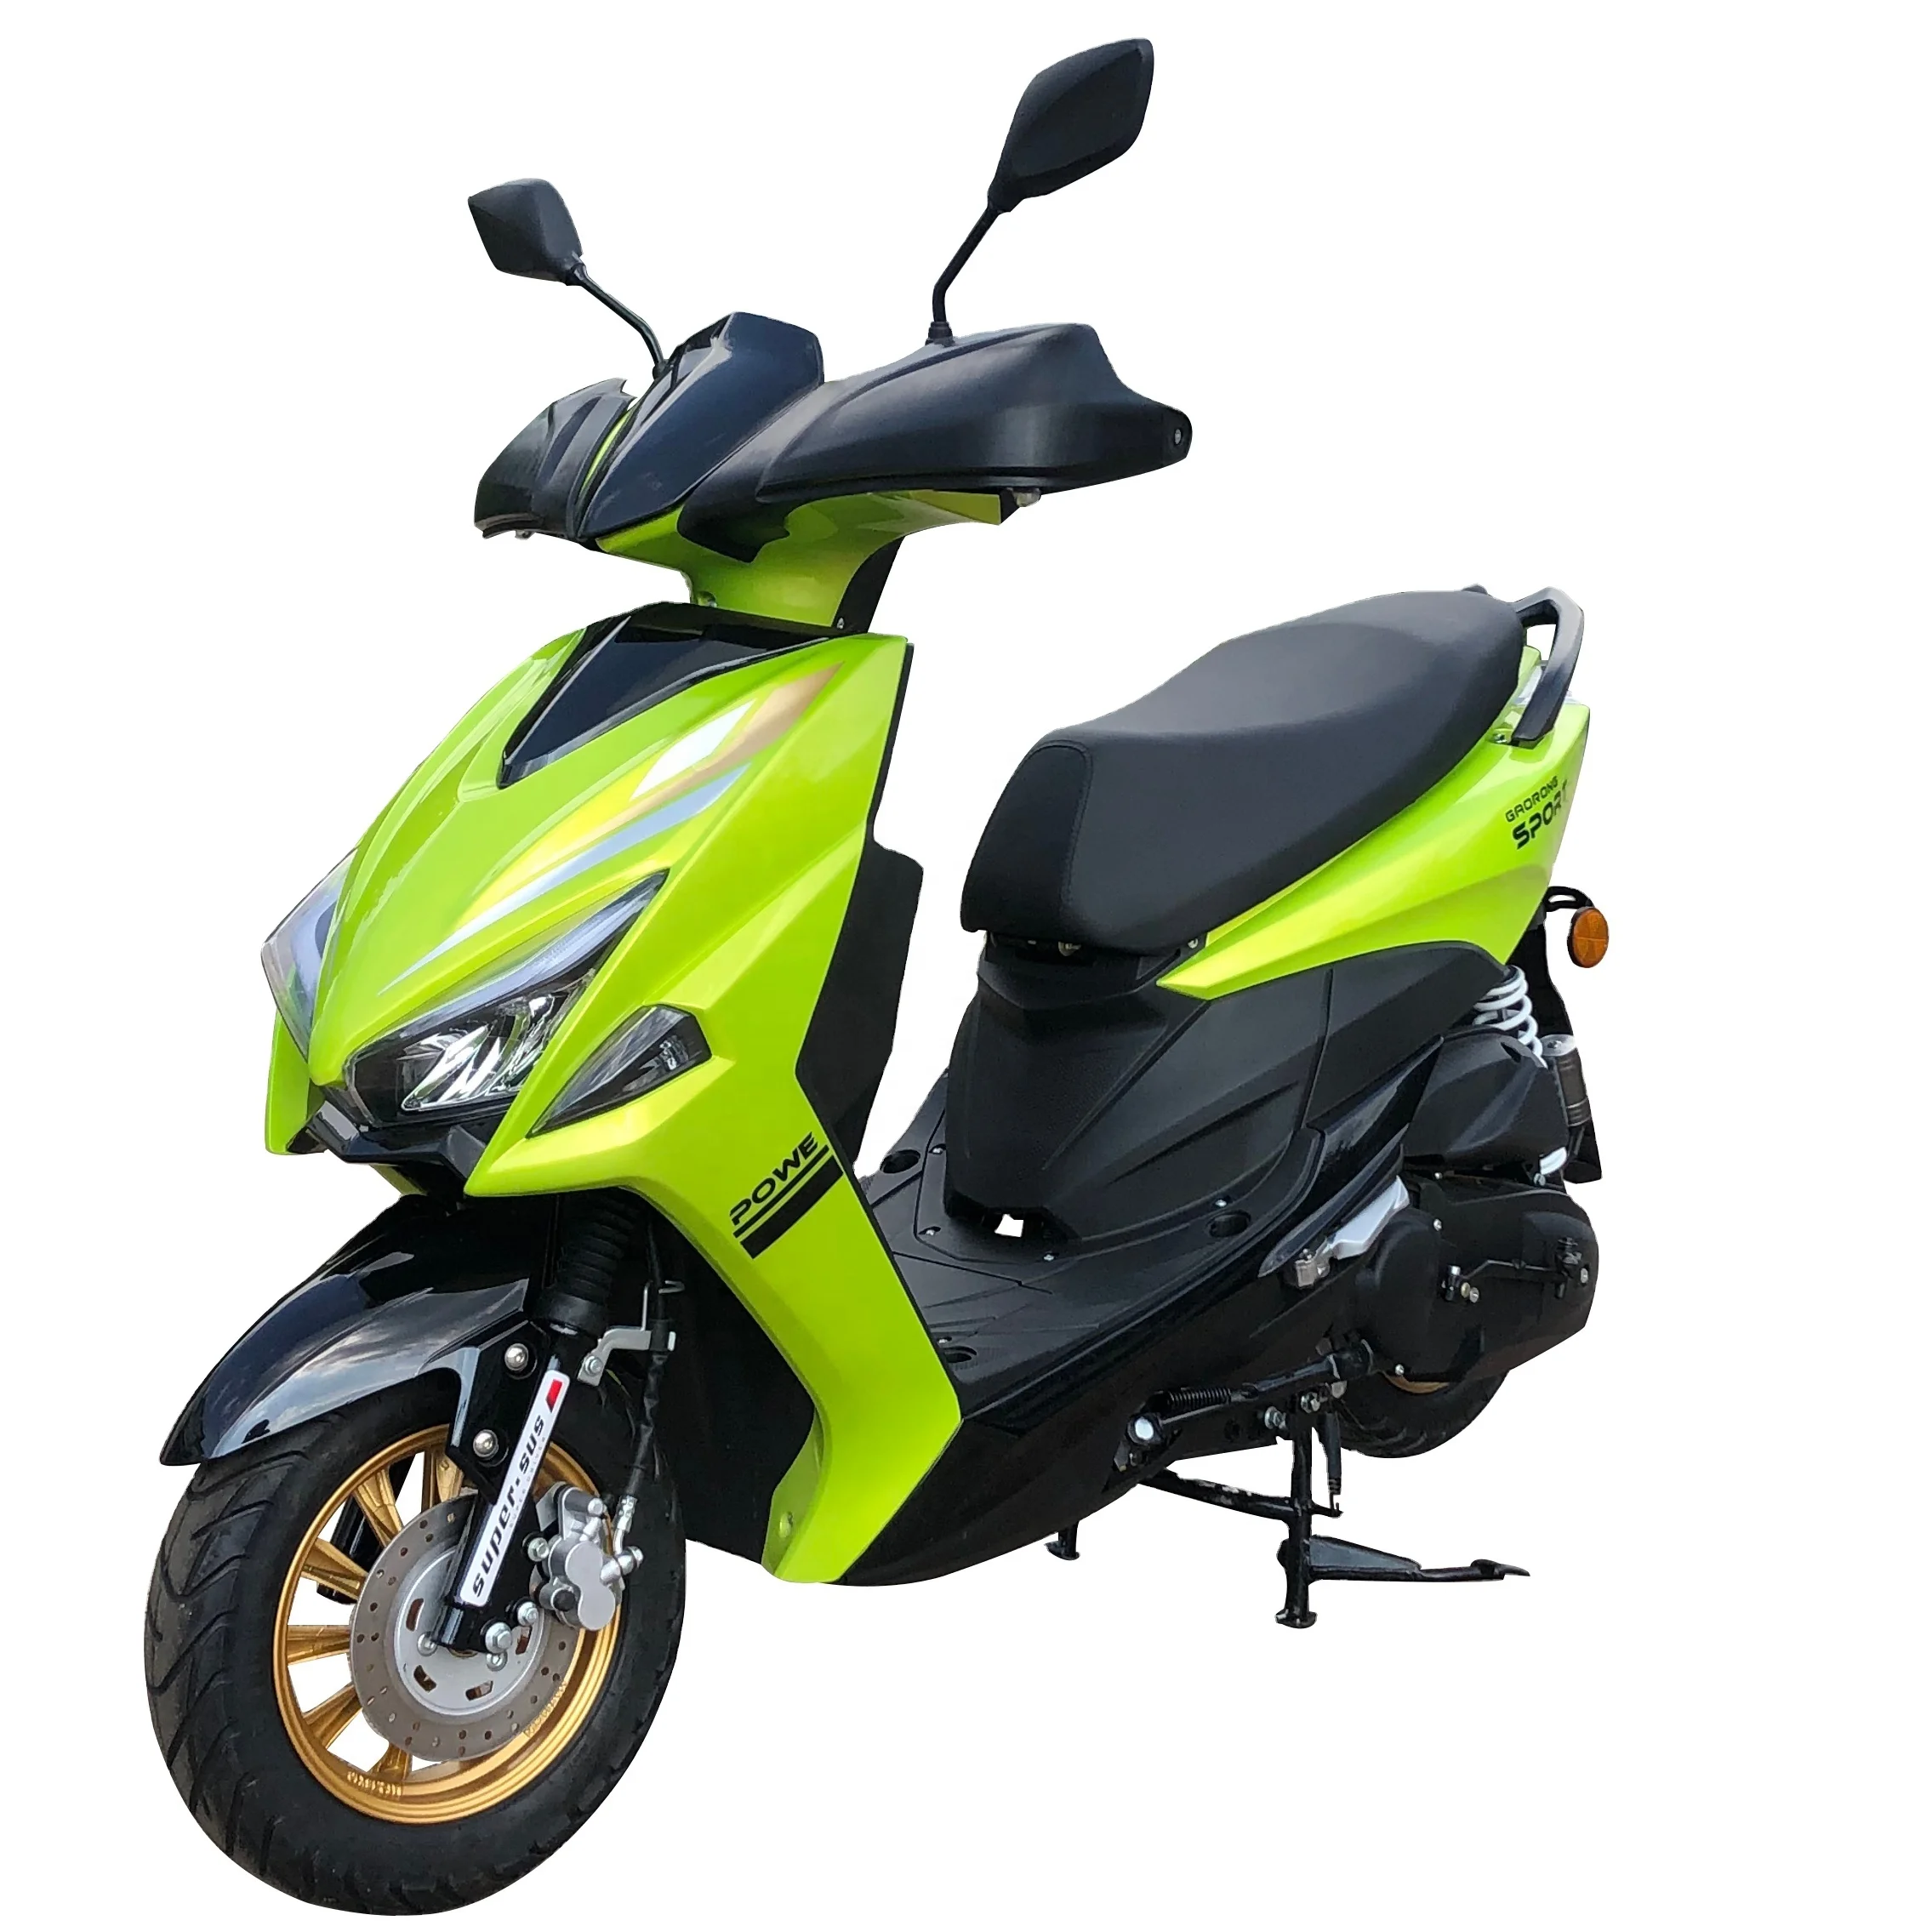 matron maskulinitet kighul Top Selling Gasoline Scooter 125 Cc Racing Motorcycle Rear Kick Start - Buy  New Jog Fs,Motorcycle High Quality Newest,150cc Motorcycle Product on  Alibaba.com